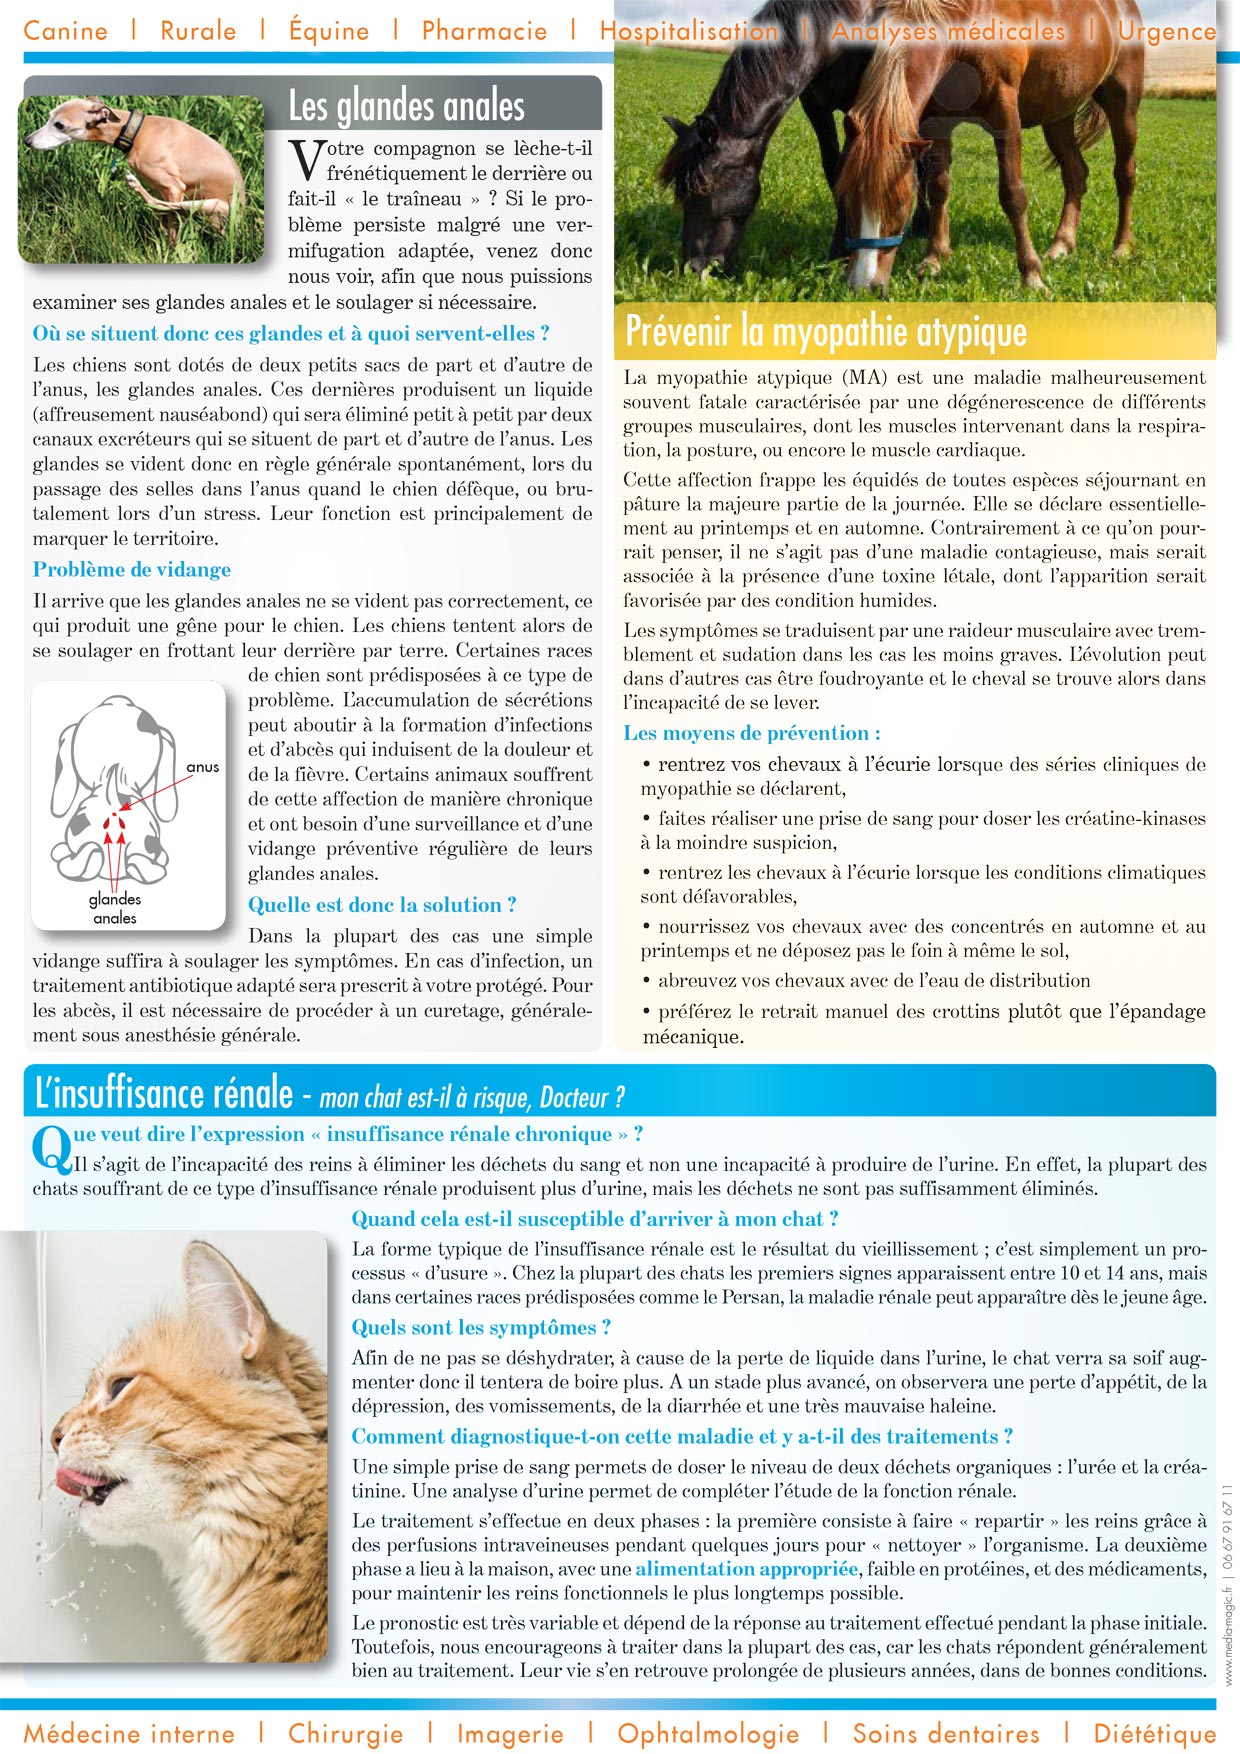 Newsletter - Automne 2012 page 2